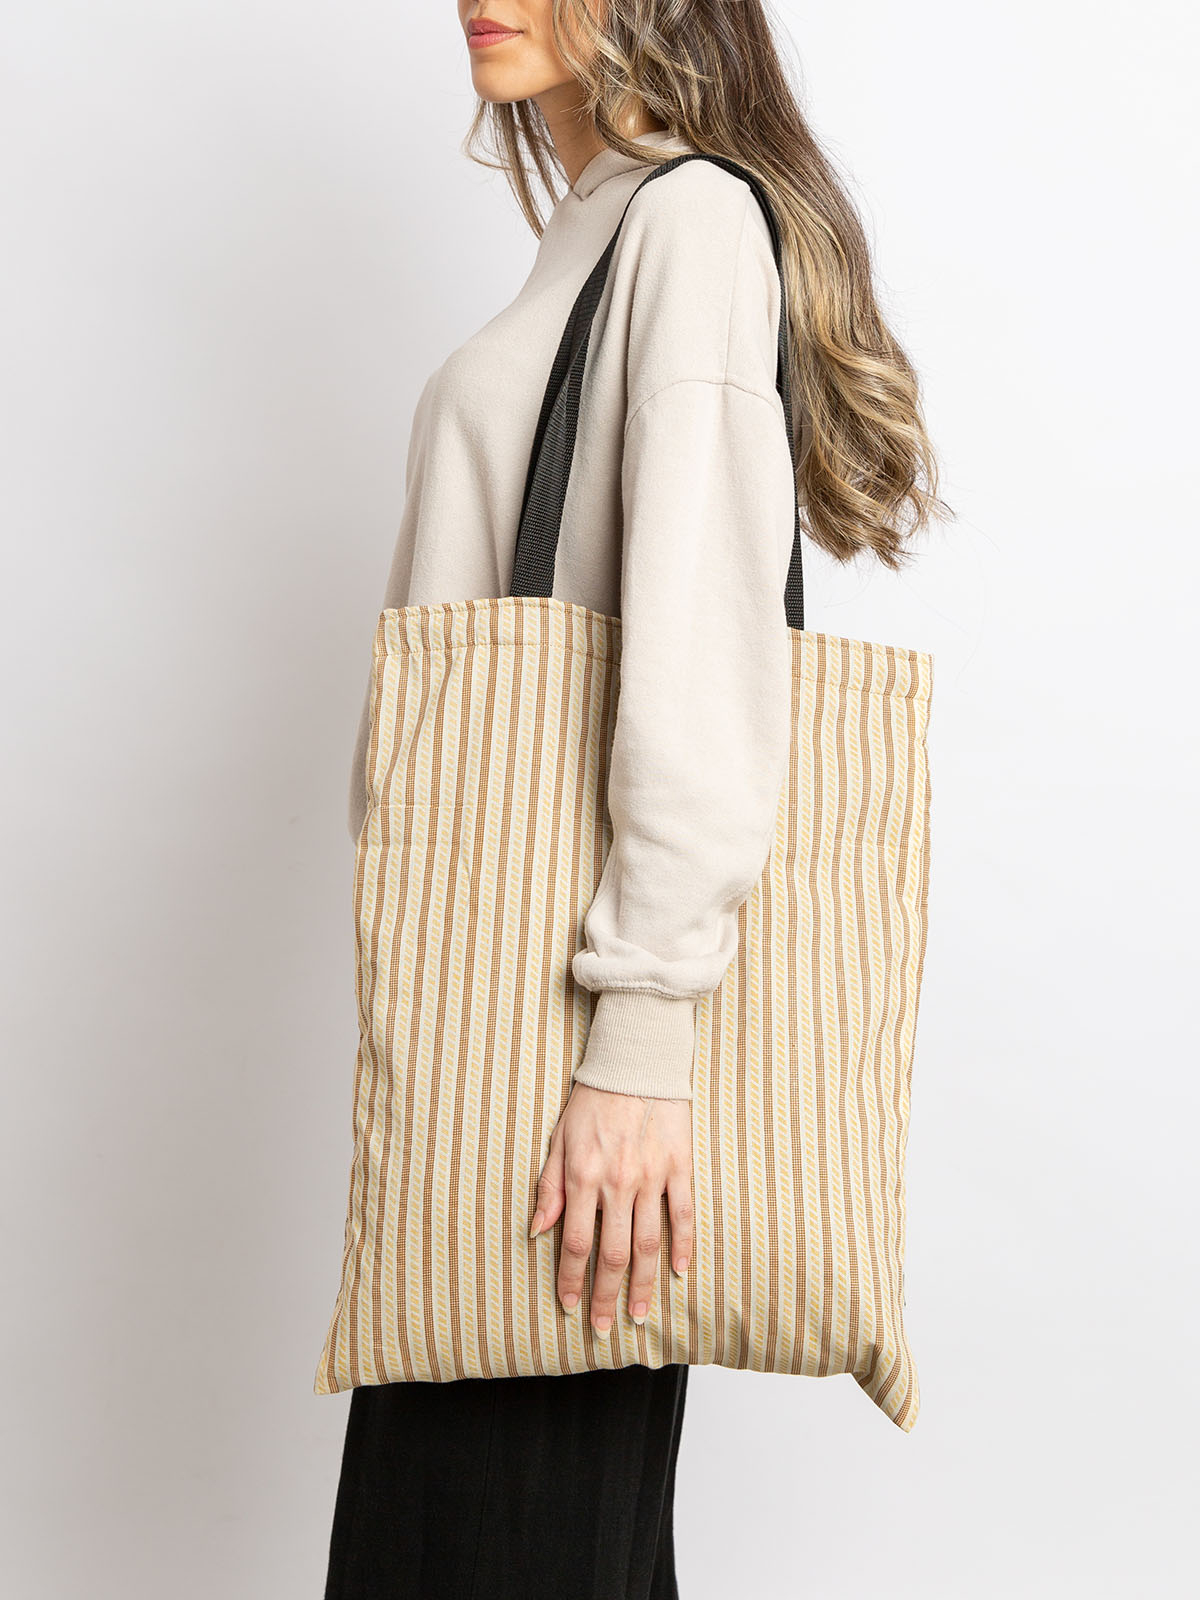 Brown & Yellow Striped - Eco-Friendly Tote Bag